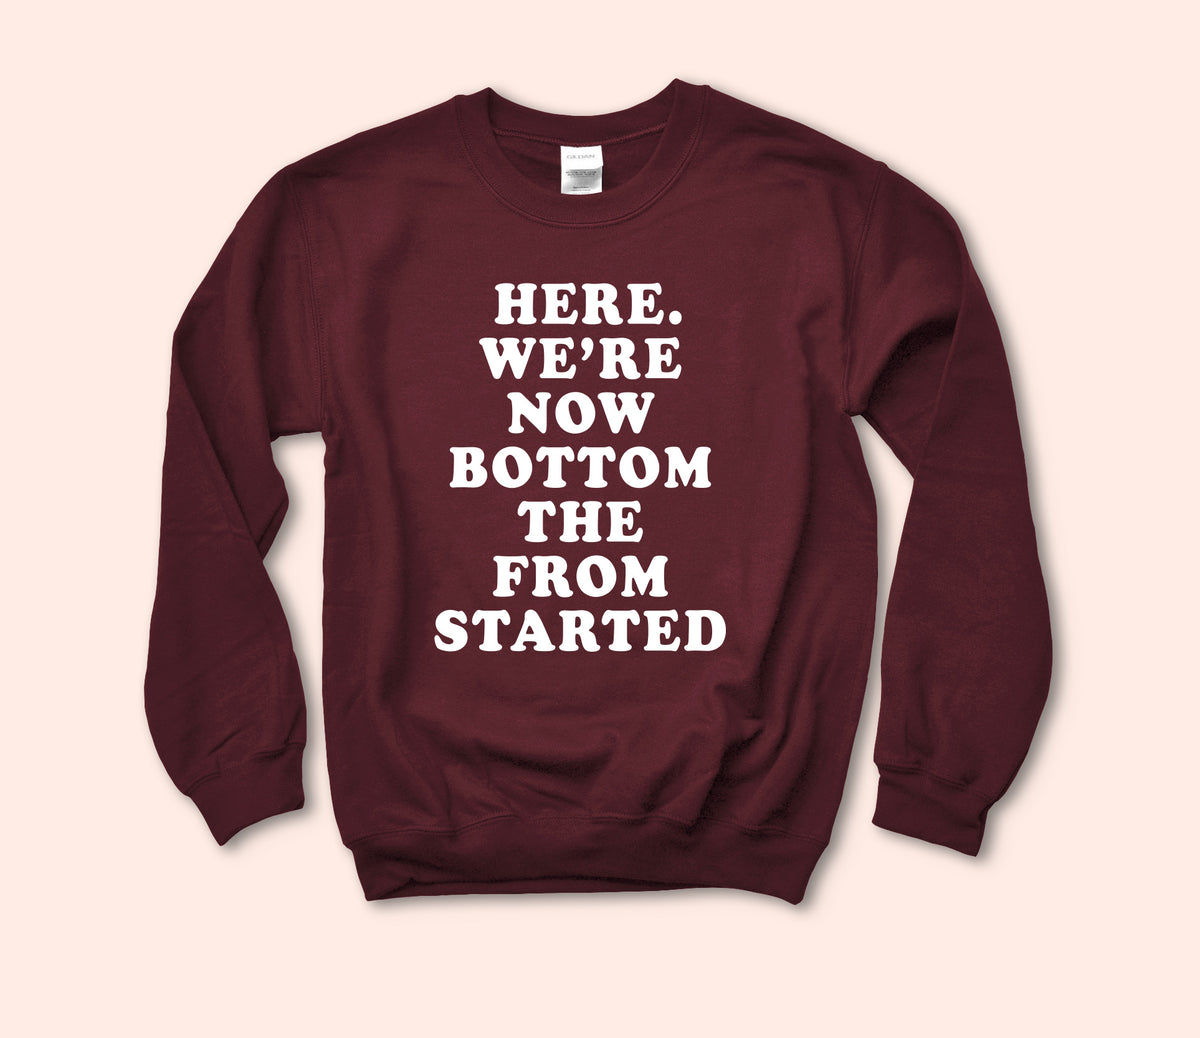 Started From The Bottom Sweatshirt